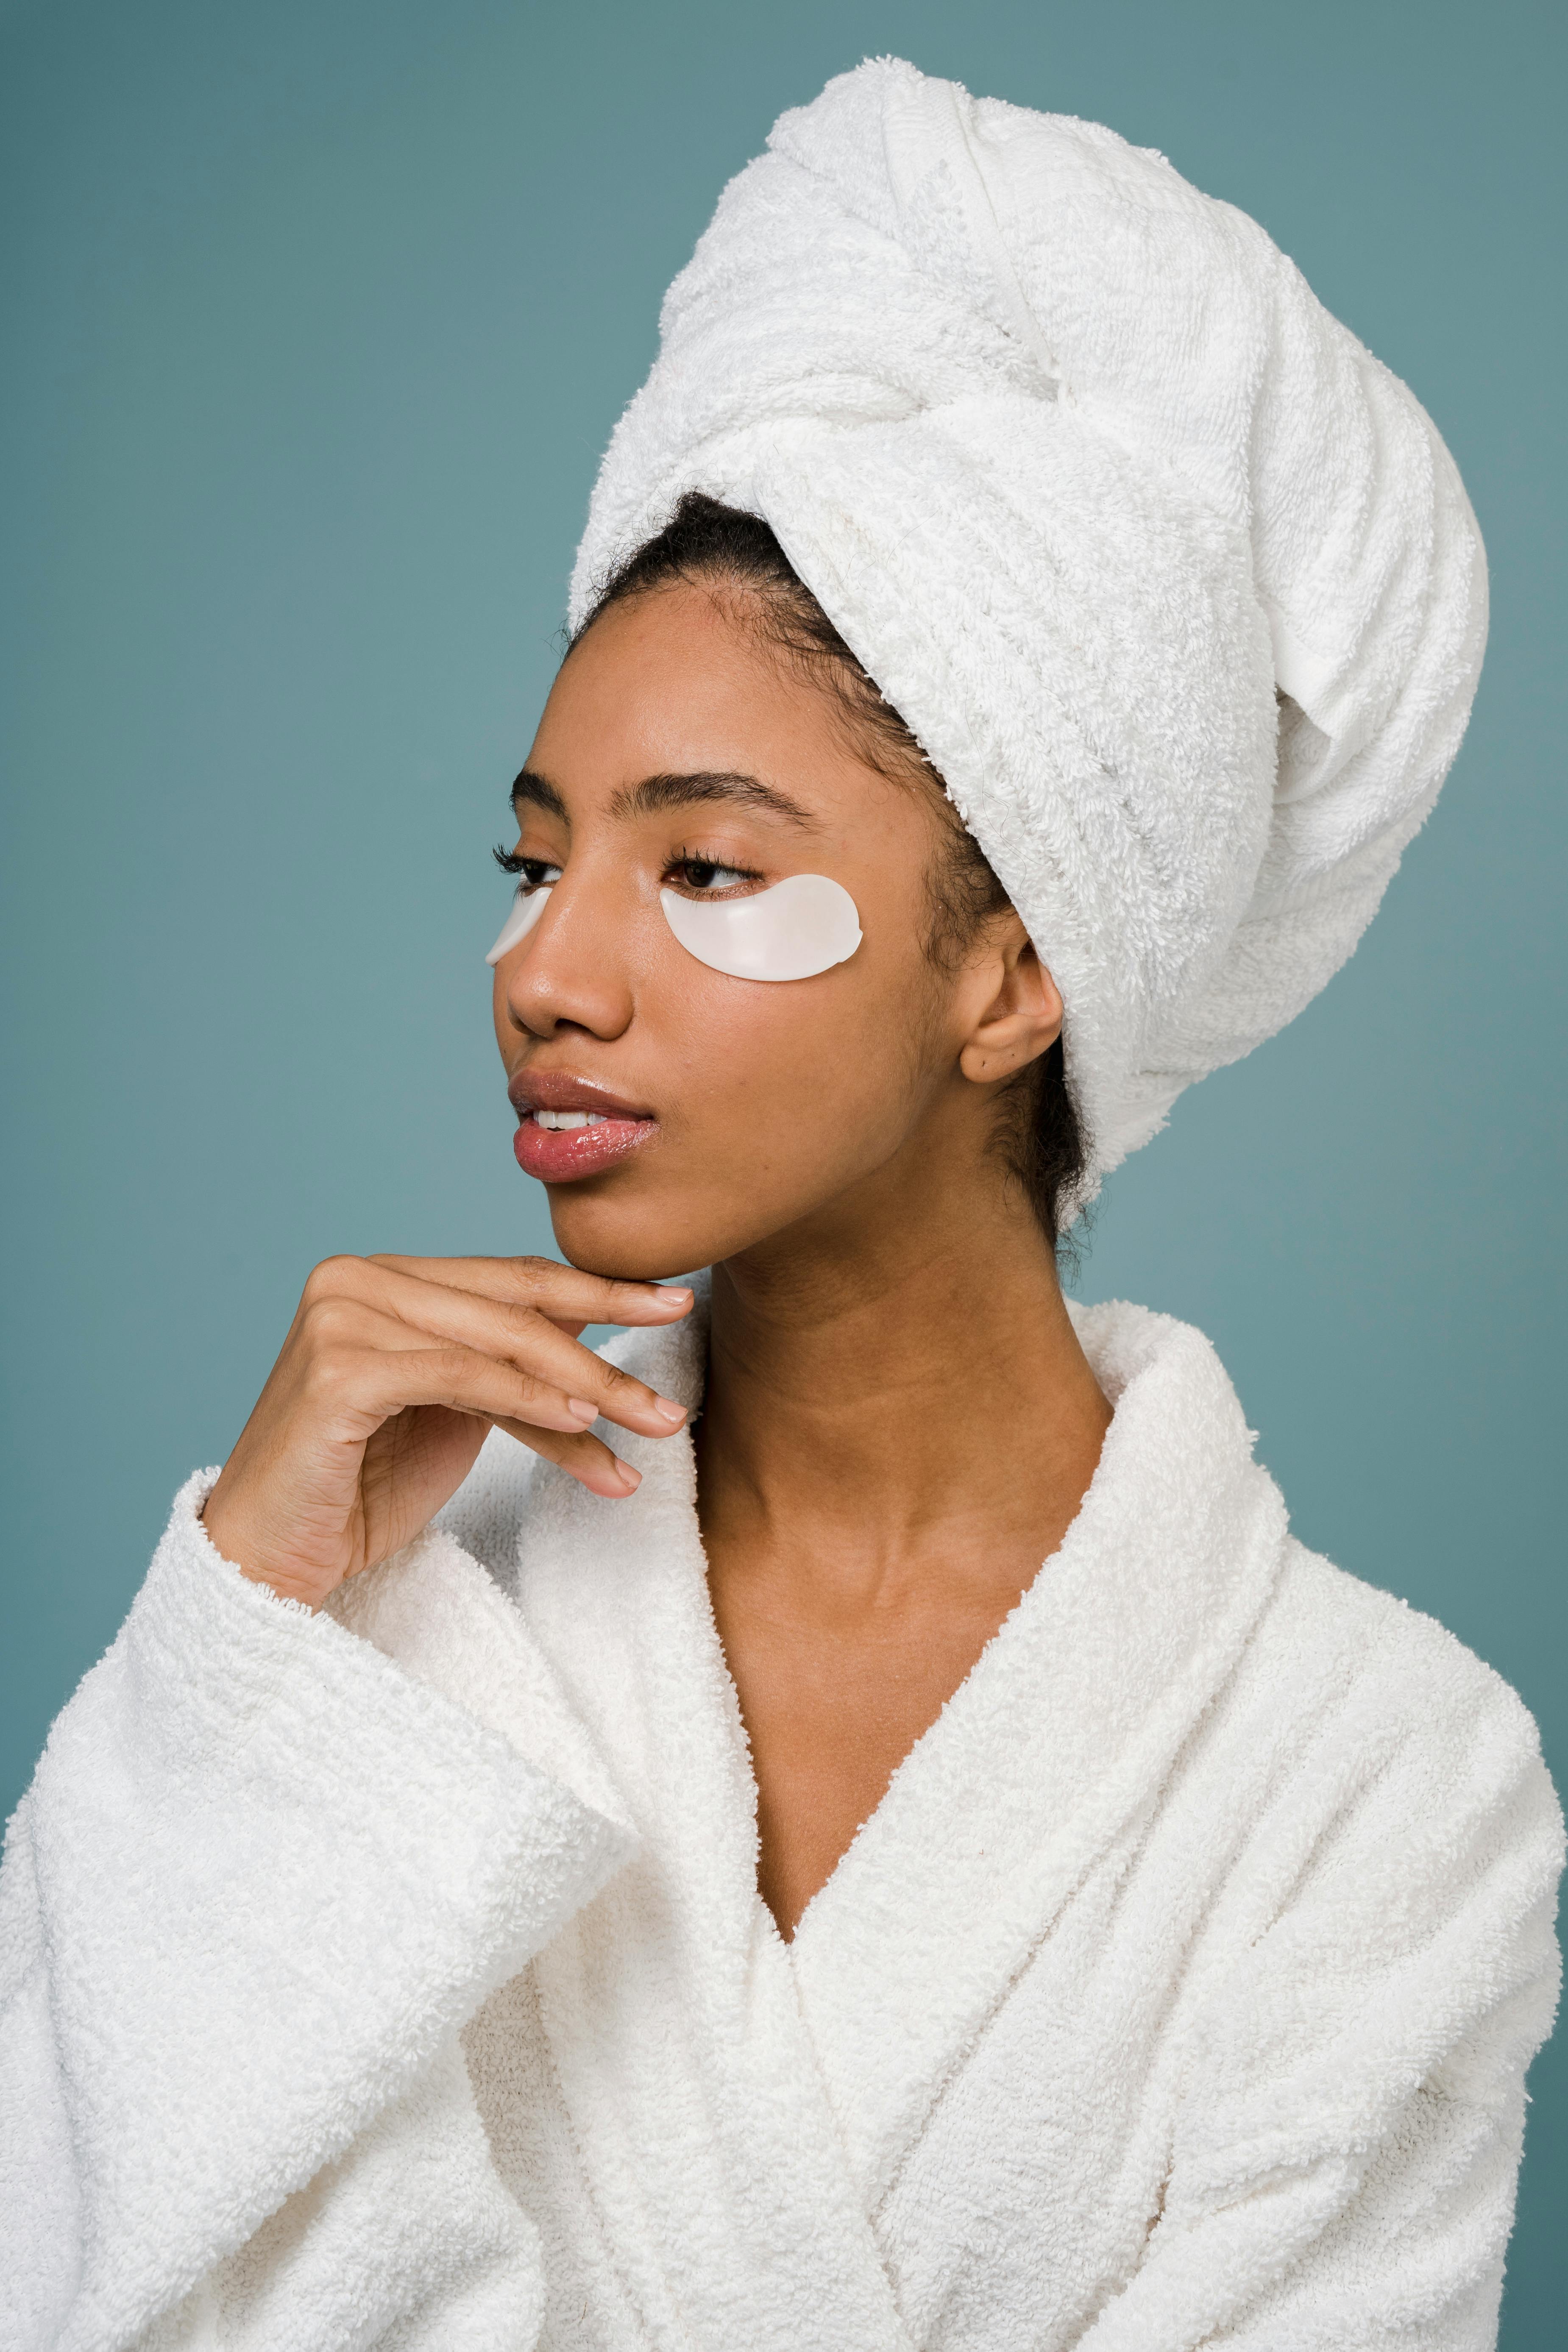 young ethnic female with eye patches touching face after bath